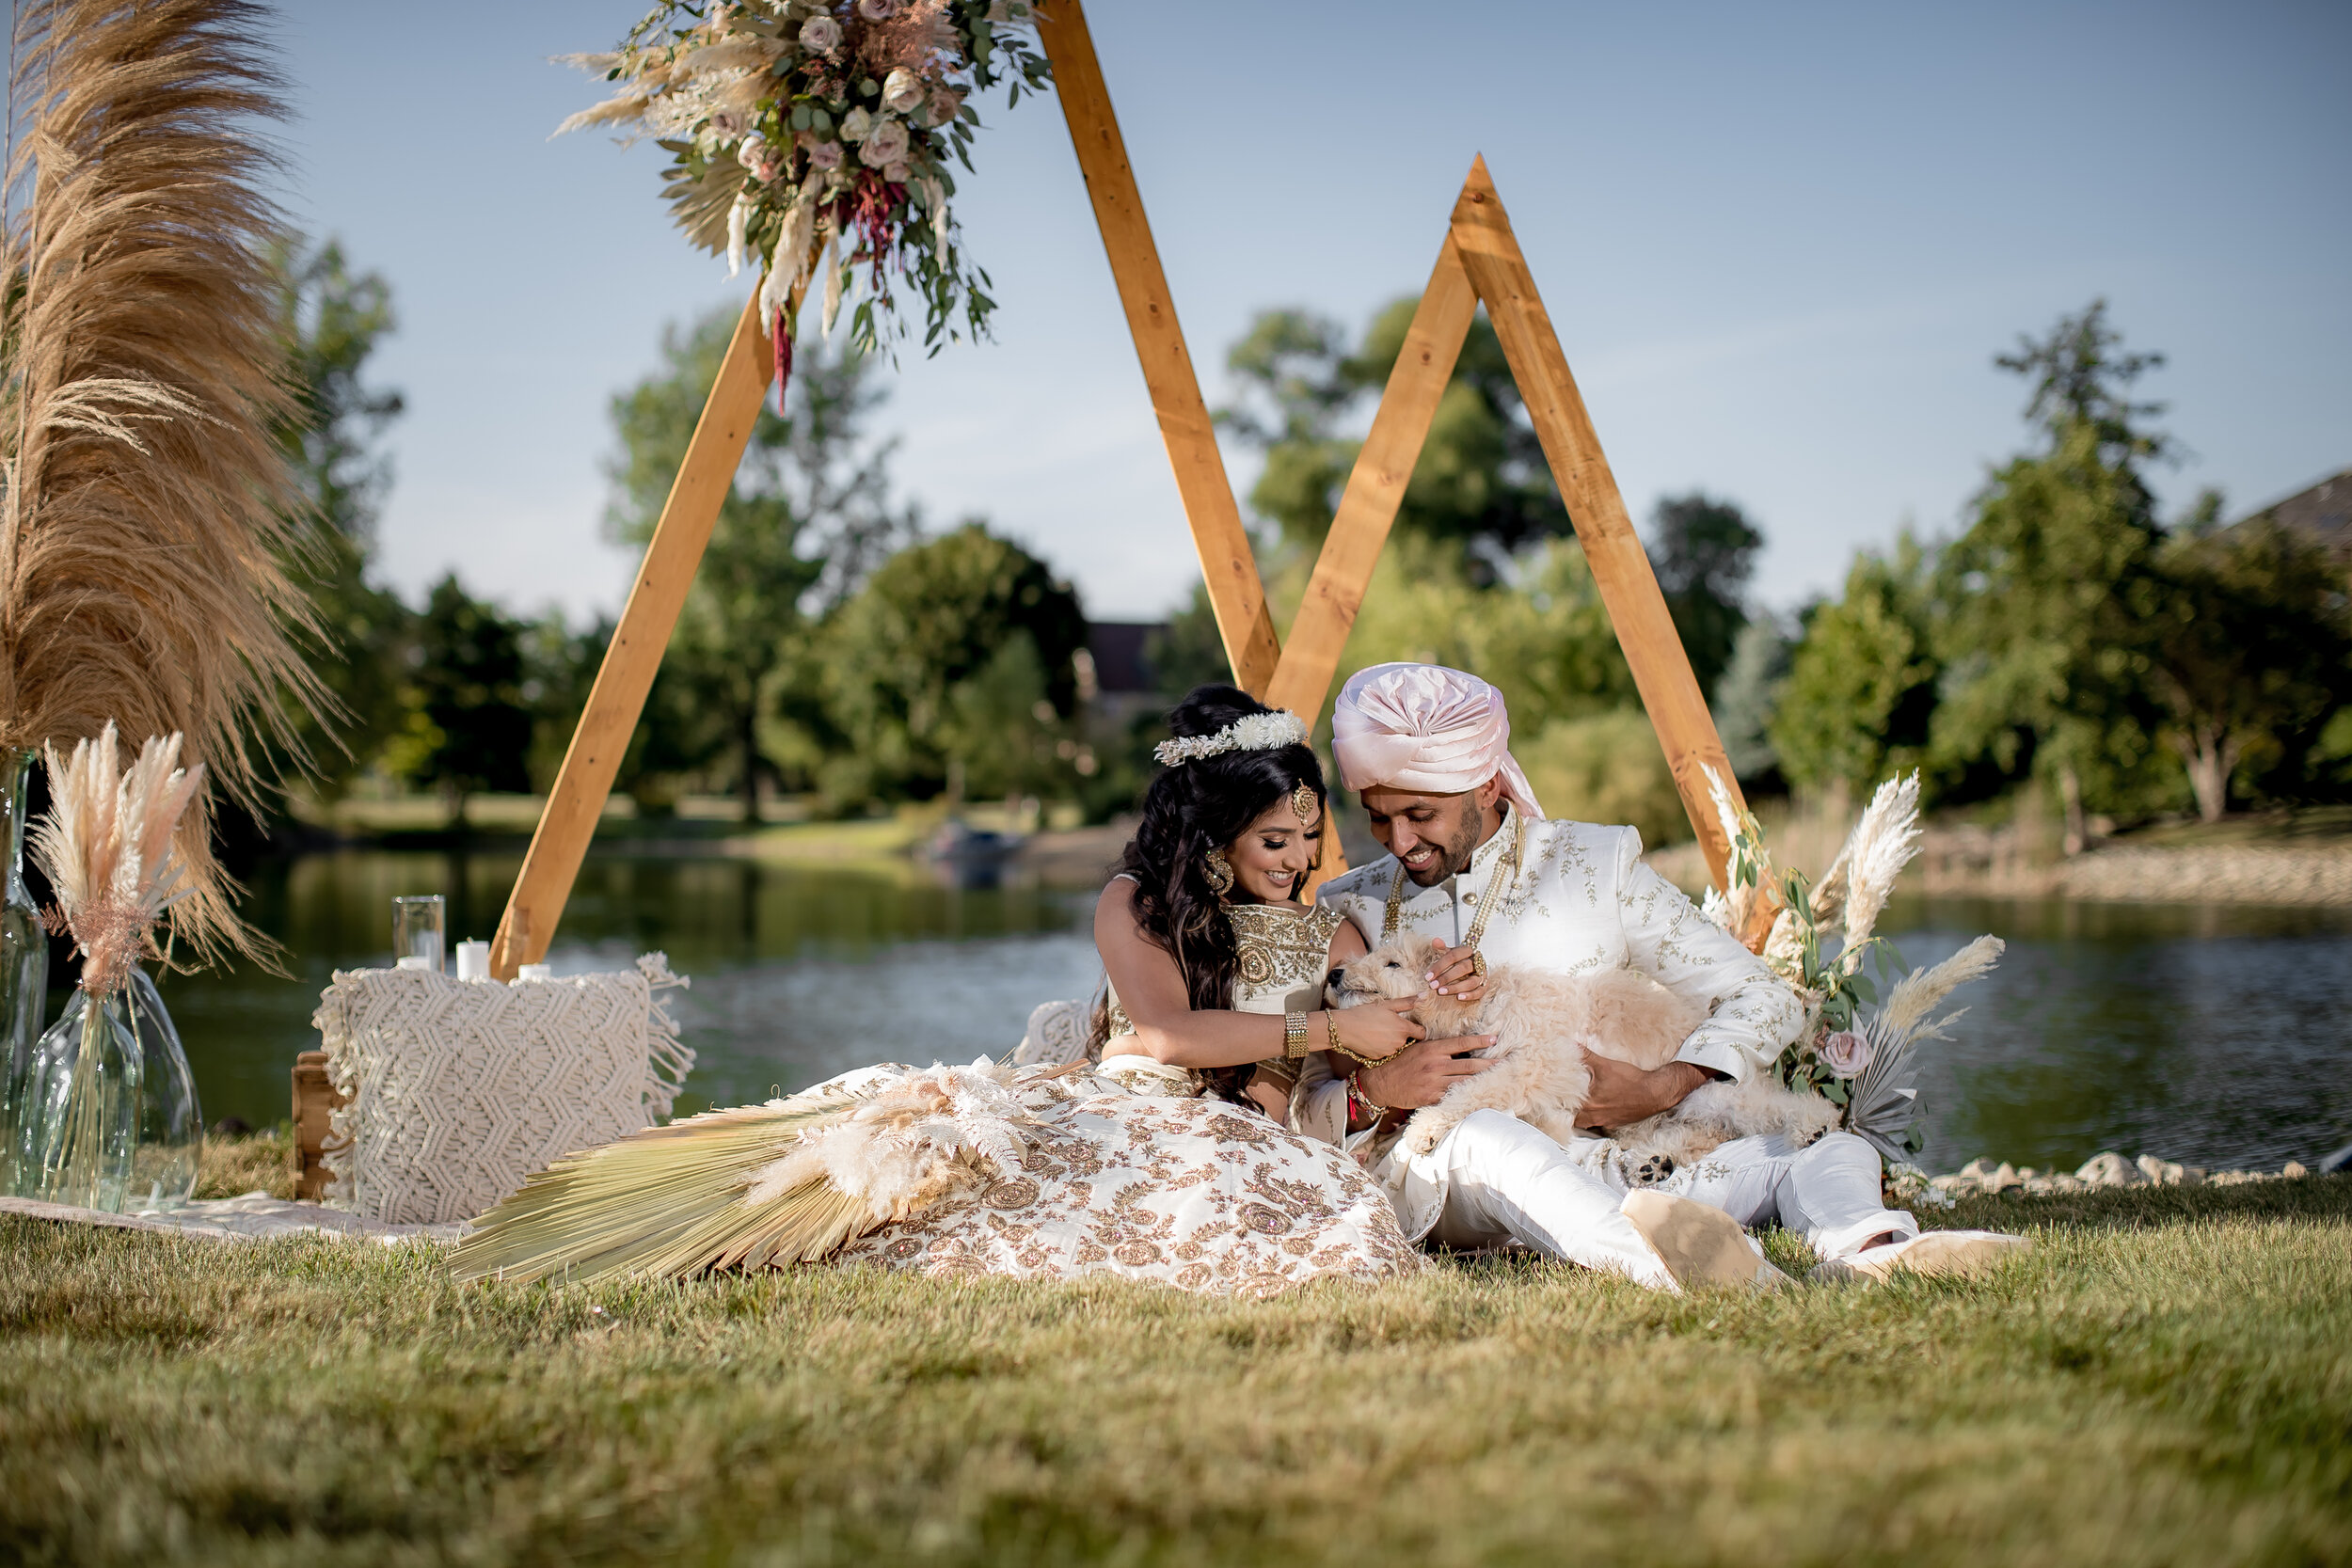 Boho-Chic Meets Indian Fusion Royalty Wedding Inspiration featured on CHI thee WED